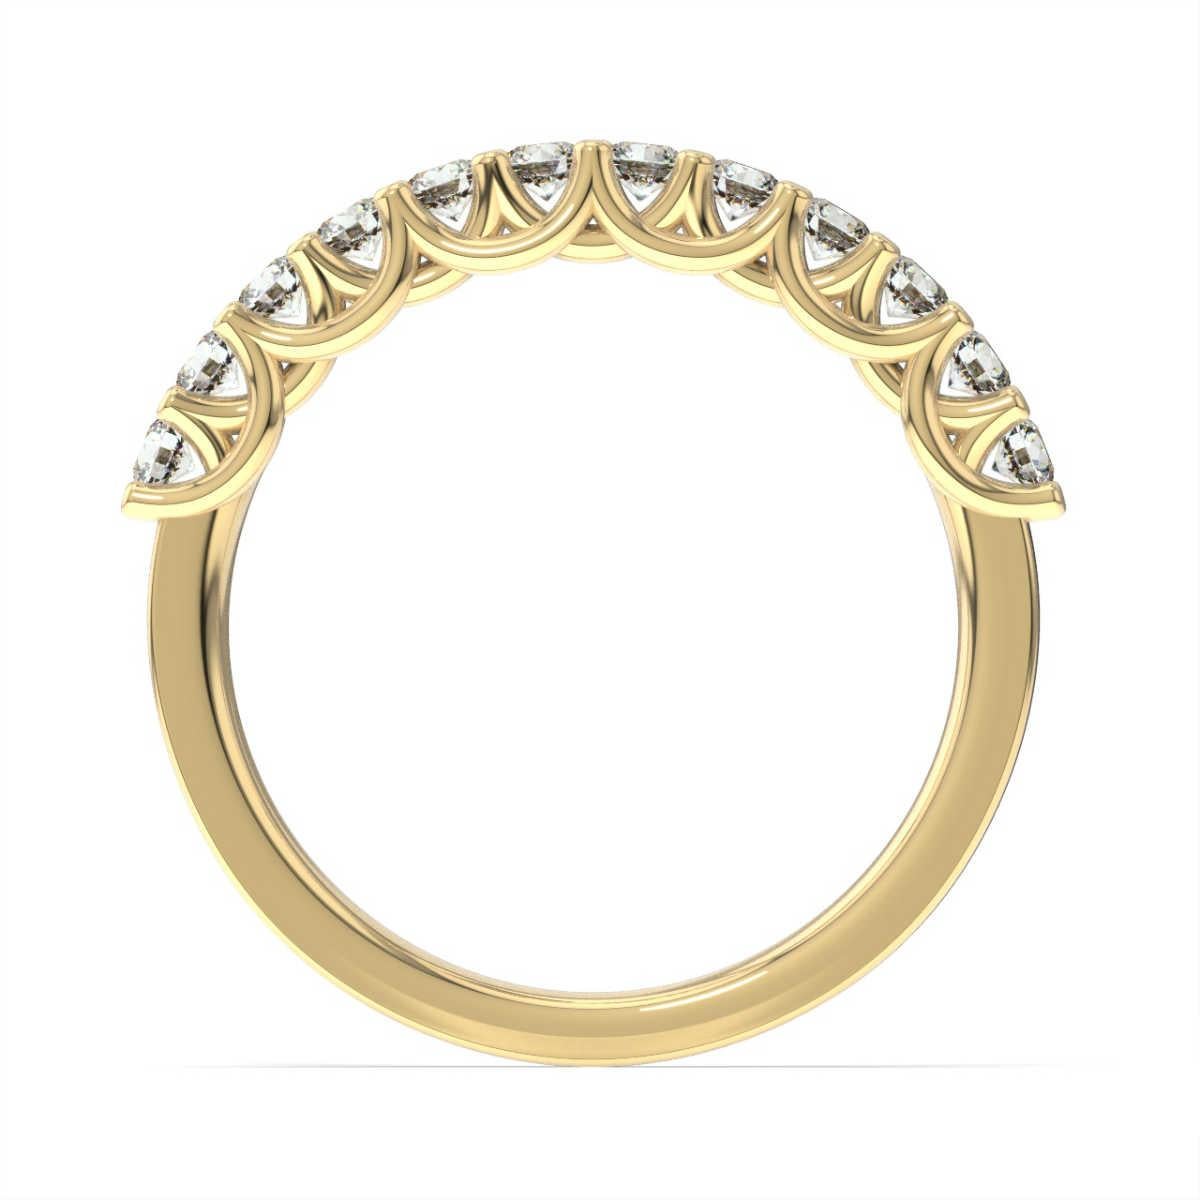 This stunning weave ring features 12 perfectly matched round brilliant diamonds. Experience the difference!

Product details: 

Center Gemstone Color: WHITE
Side Gemstone Type: NATURAL DIAMOND
Side Gemstone Shape: ROUND
Metal: 14K Yellow Gold
Metal